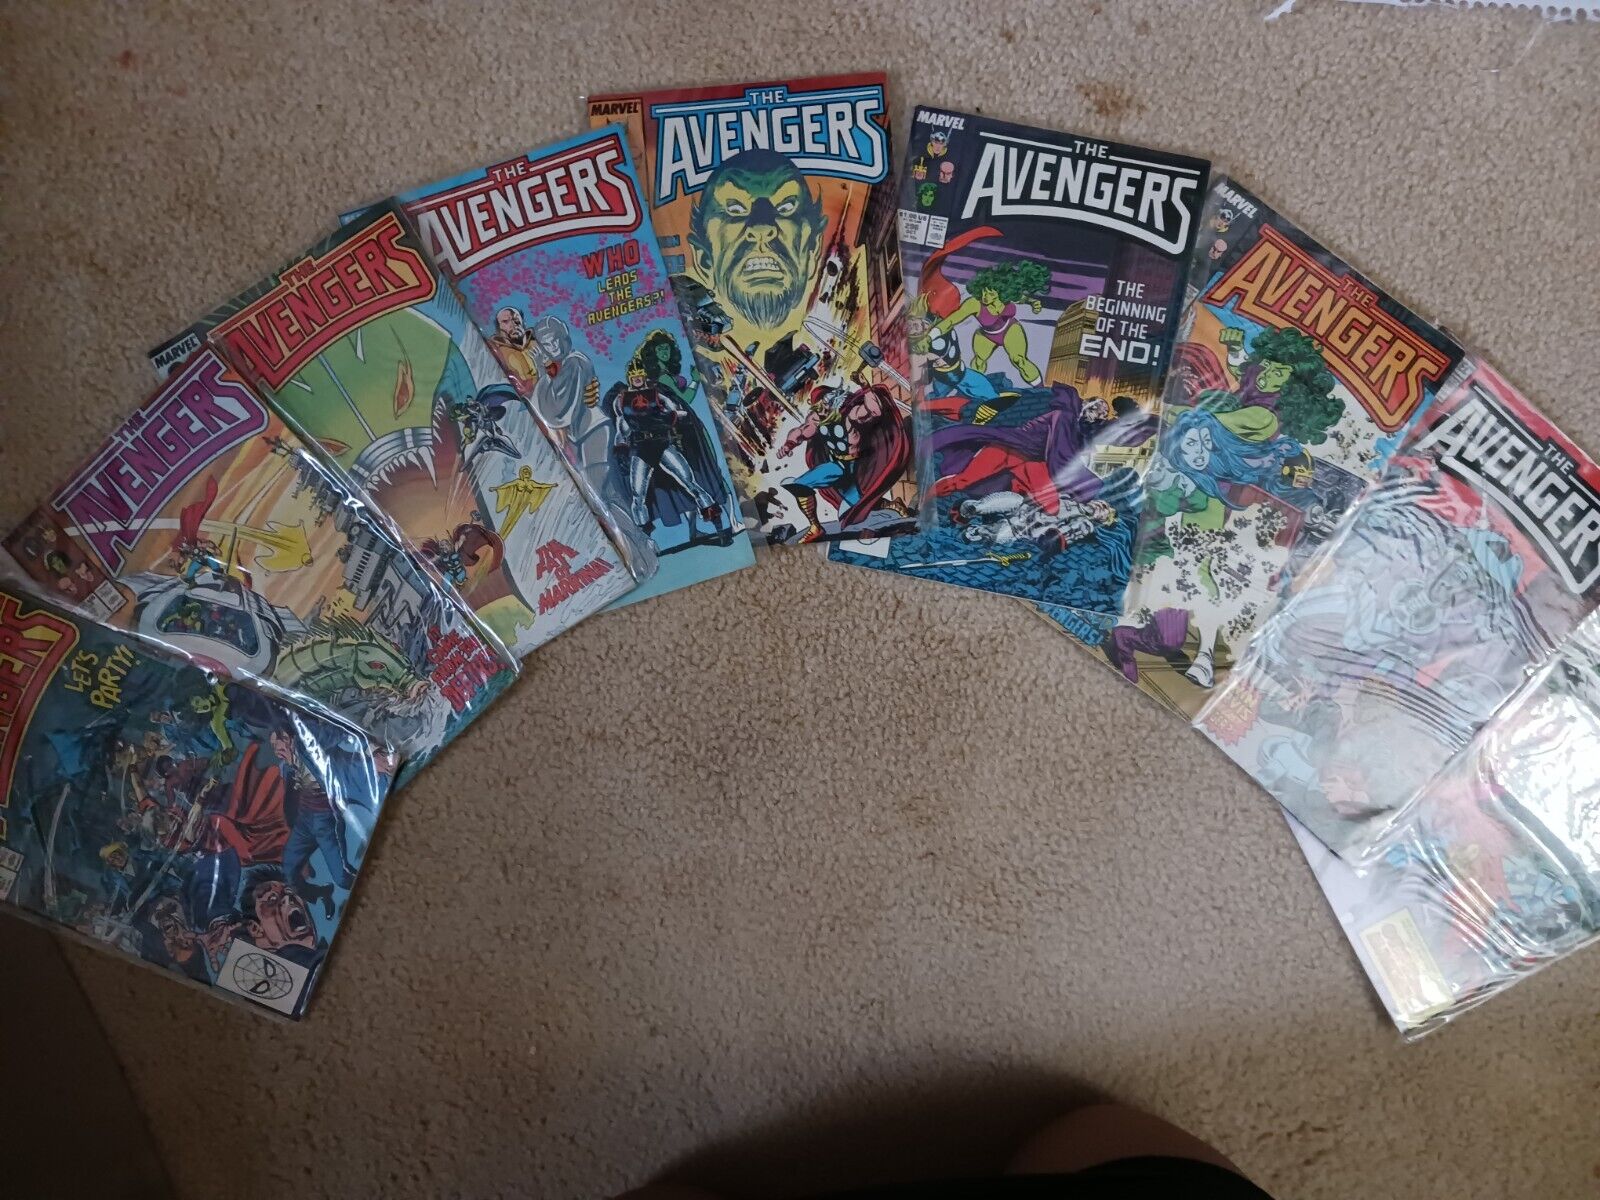 Marvel: The Avengers Series, Issue 291-299 - Copper Age (BUNDLE)